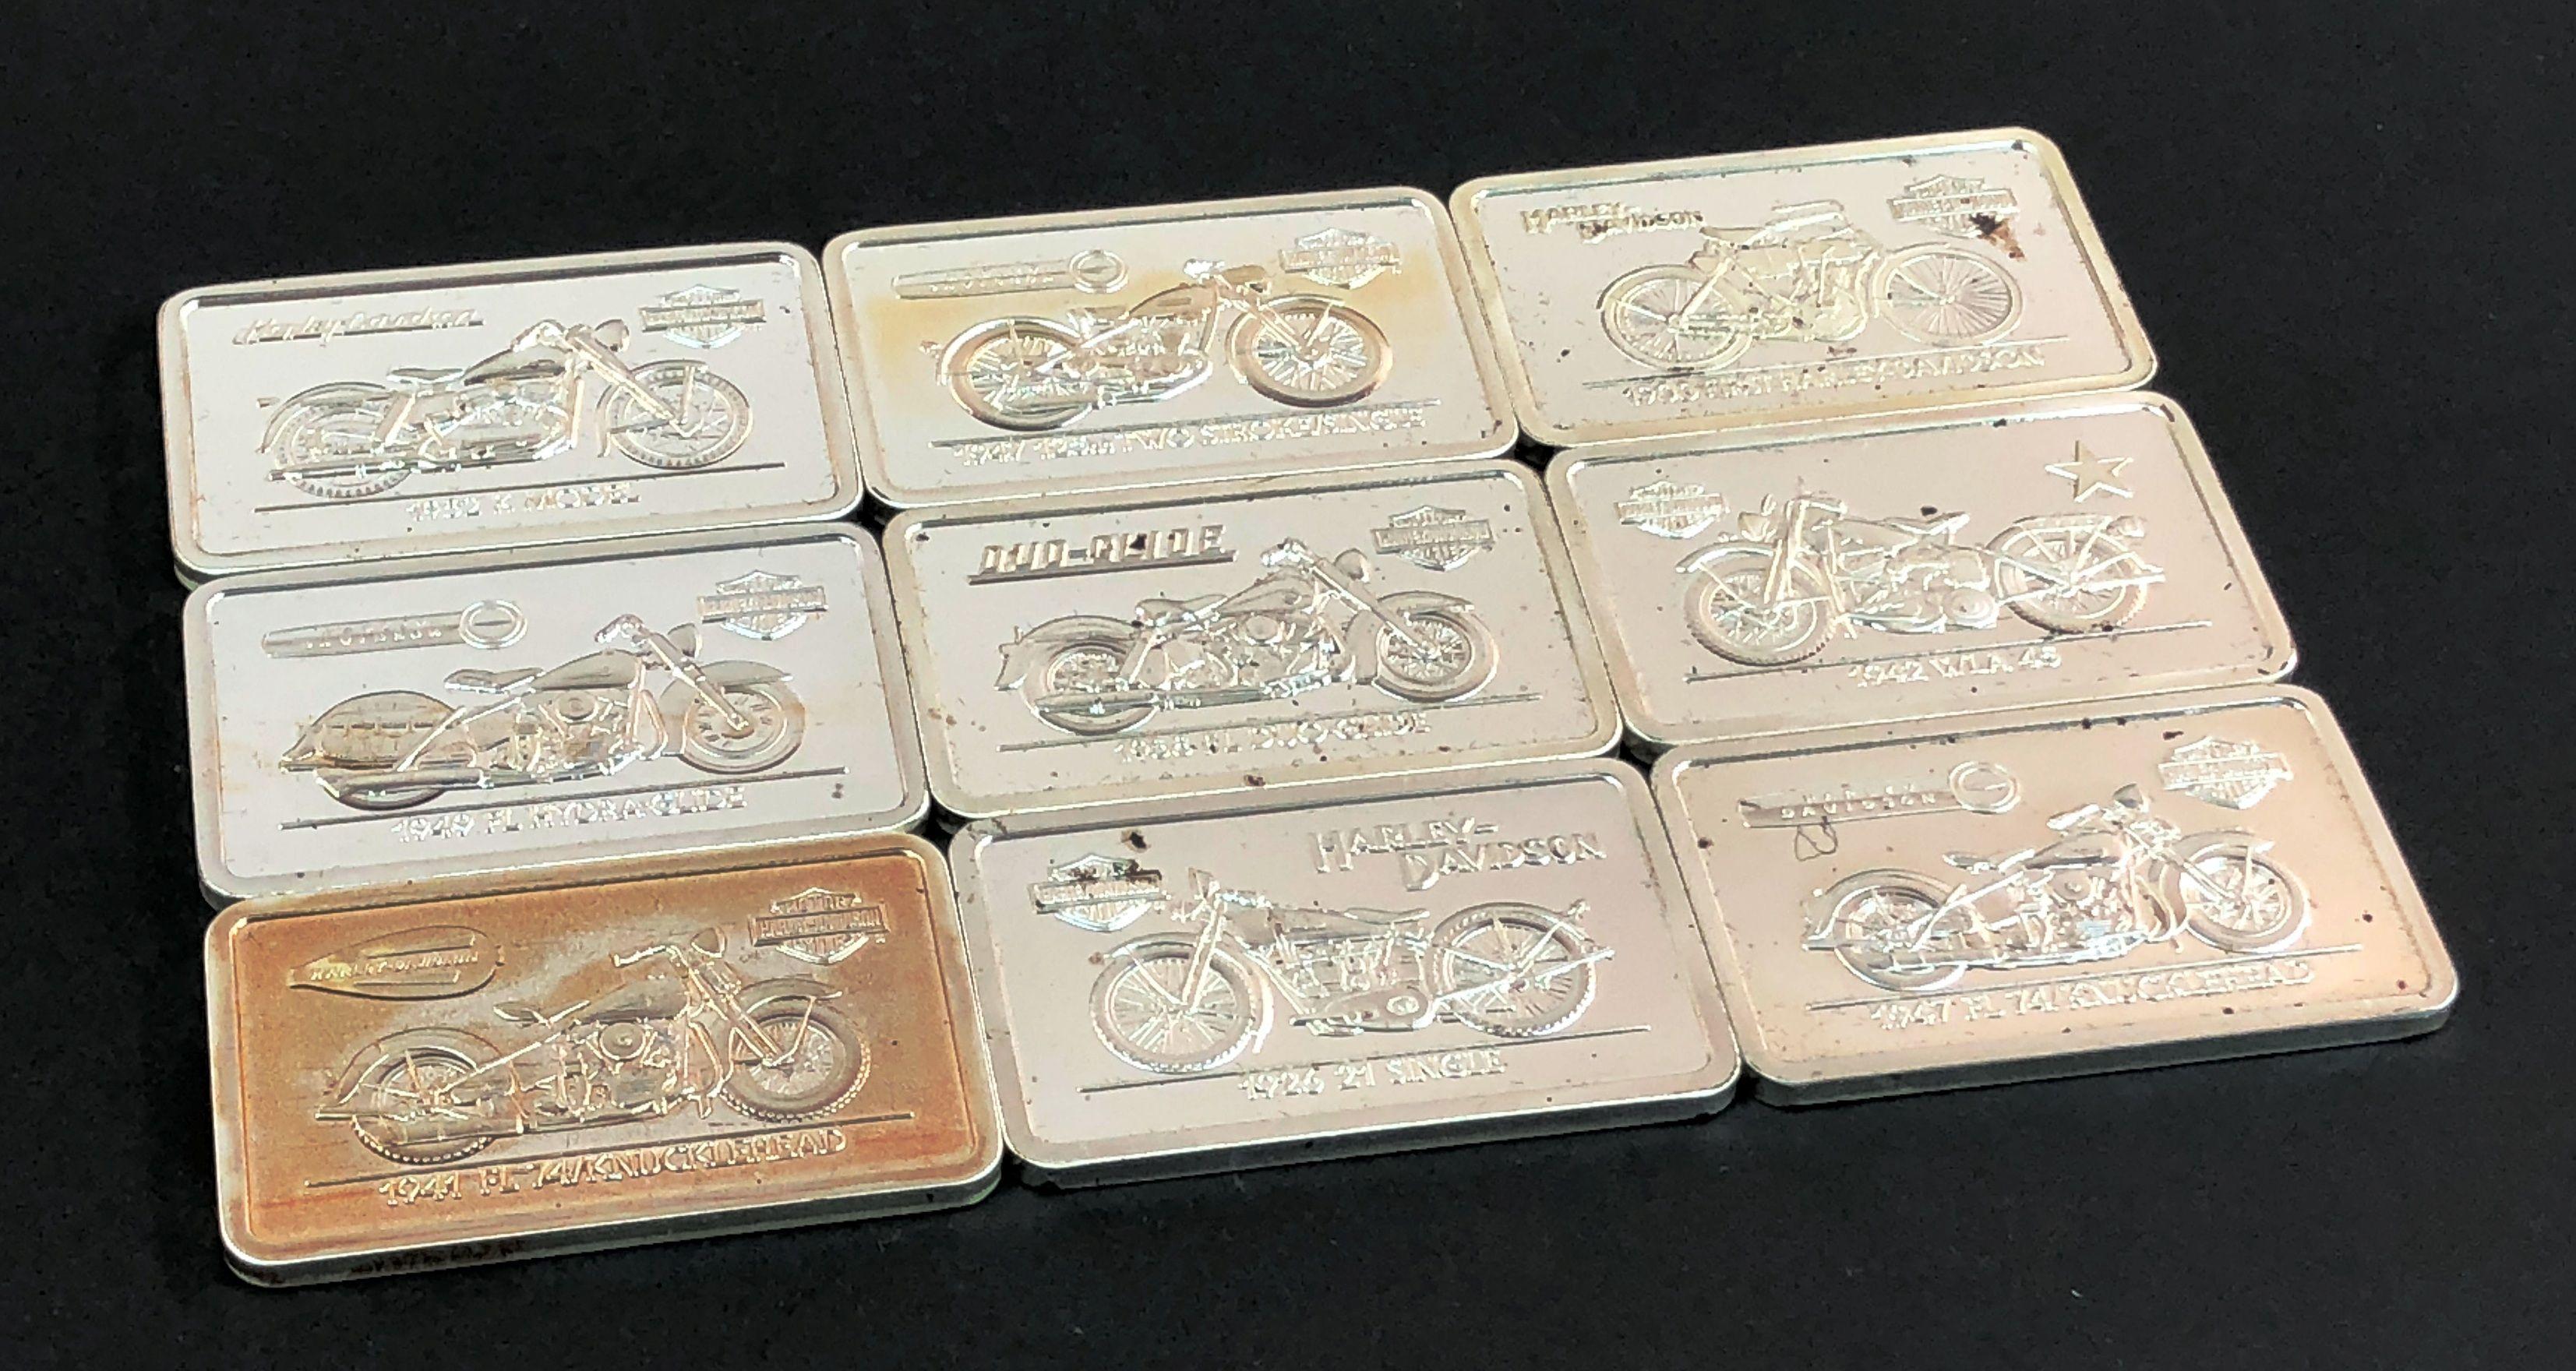 Collection of 1992 Harley Davidson Brookfield Collector Guild .999 Fine Silver Bars - 27.6 Troy Oz